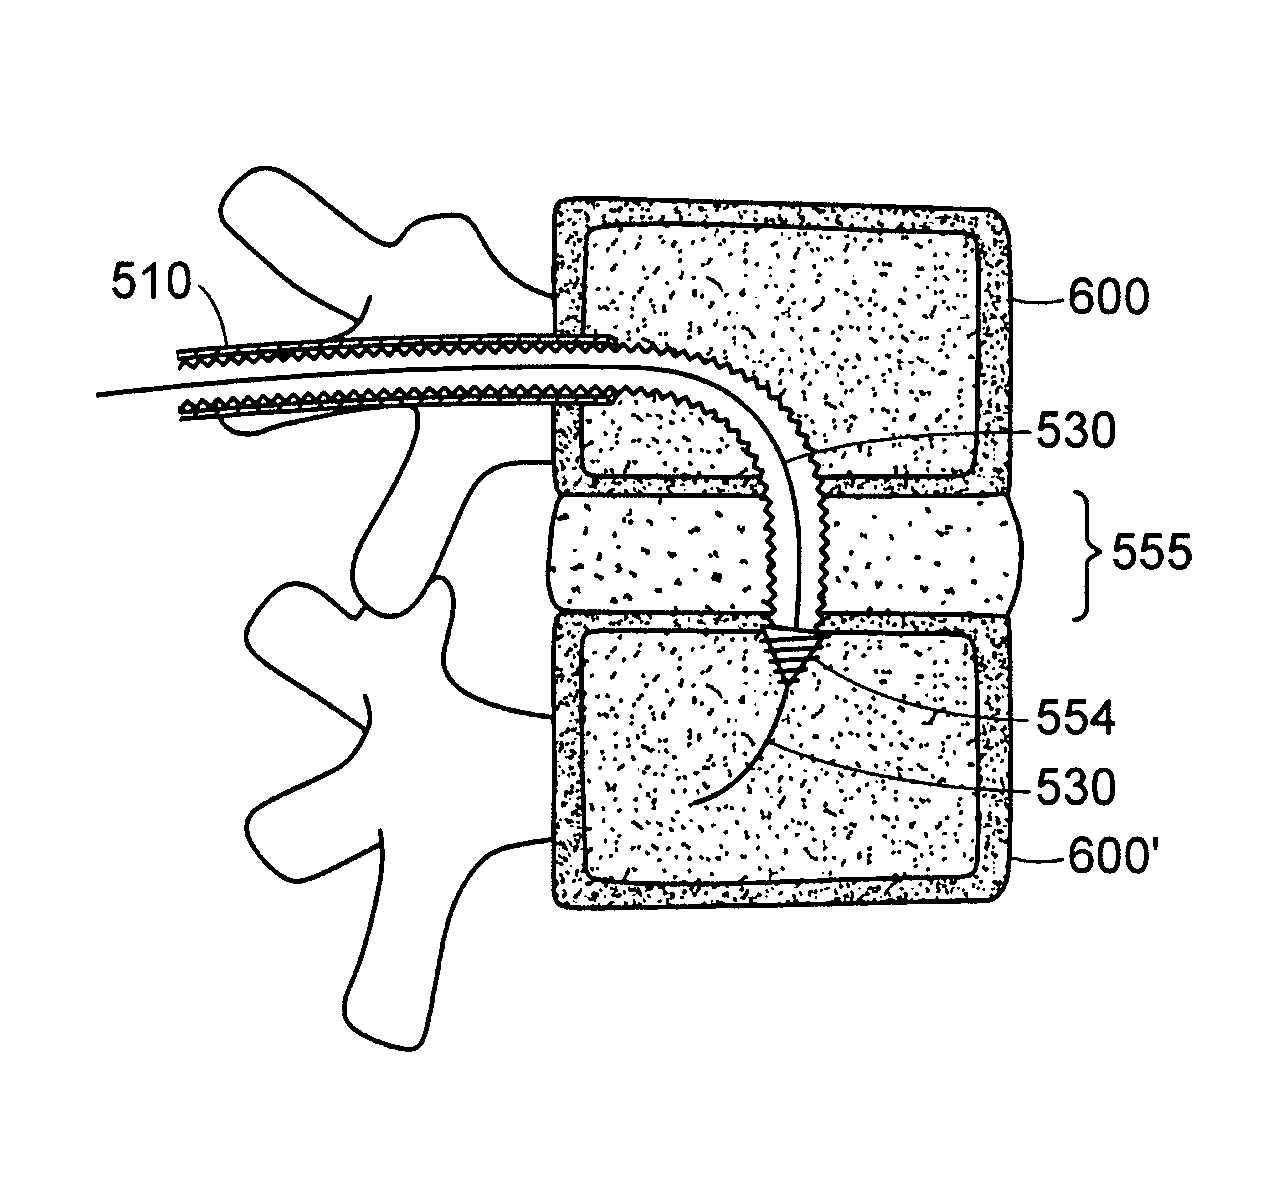 Devices and methods for stabilizing a spinal region